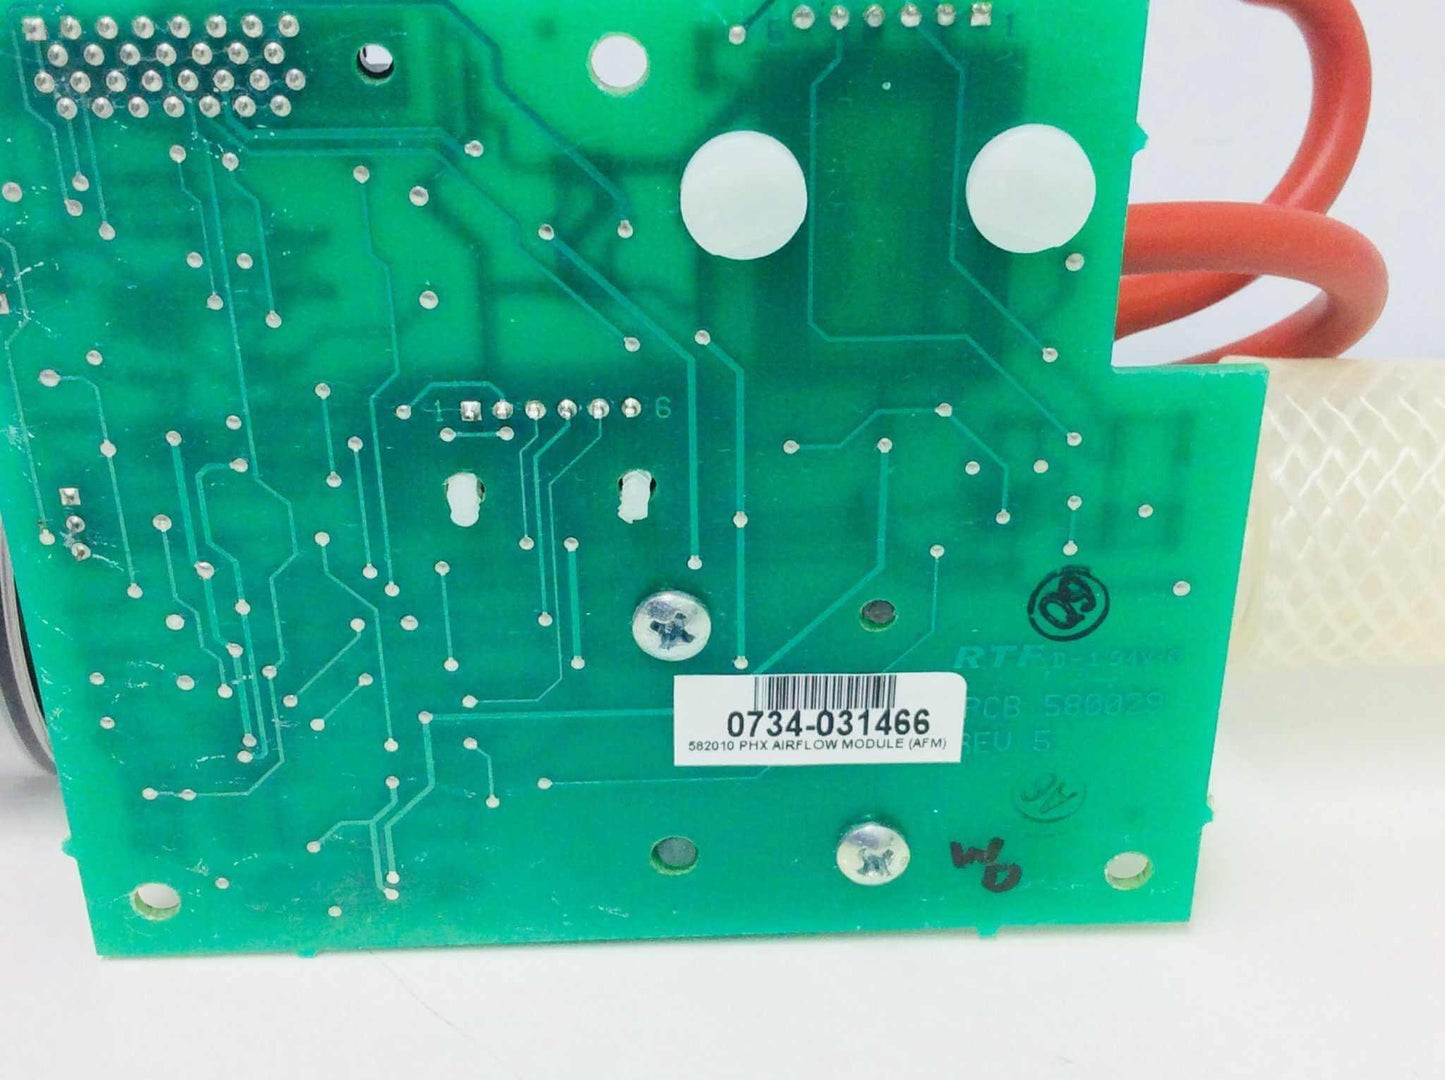 Used Philips Respironics 0808-033507 Replacement PHX Airflow Module PCB Board 582010 1202625 - MBR Medicals